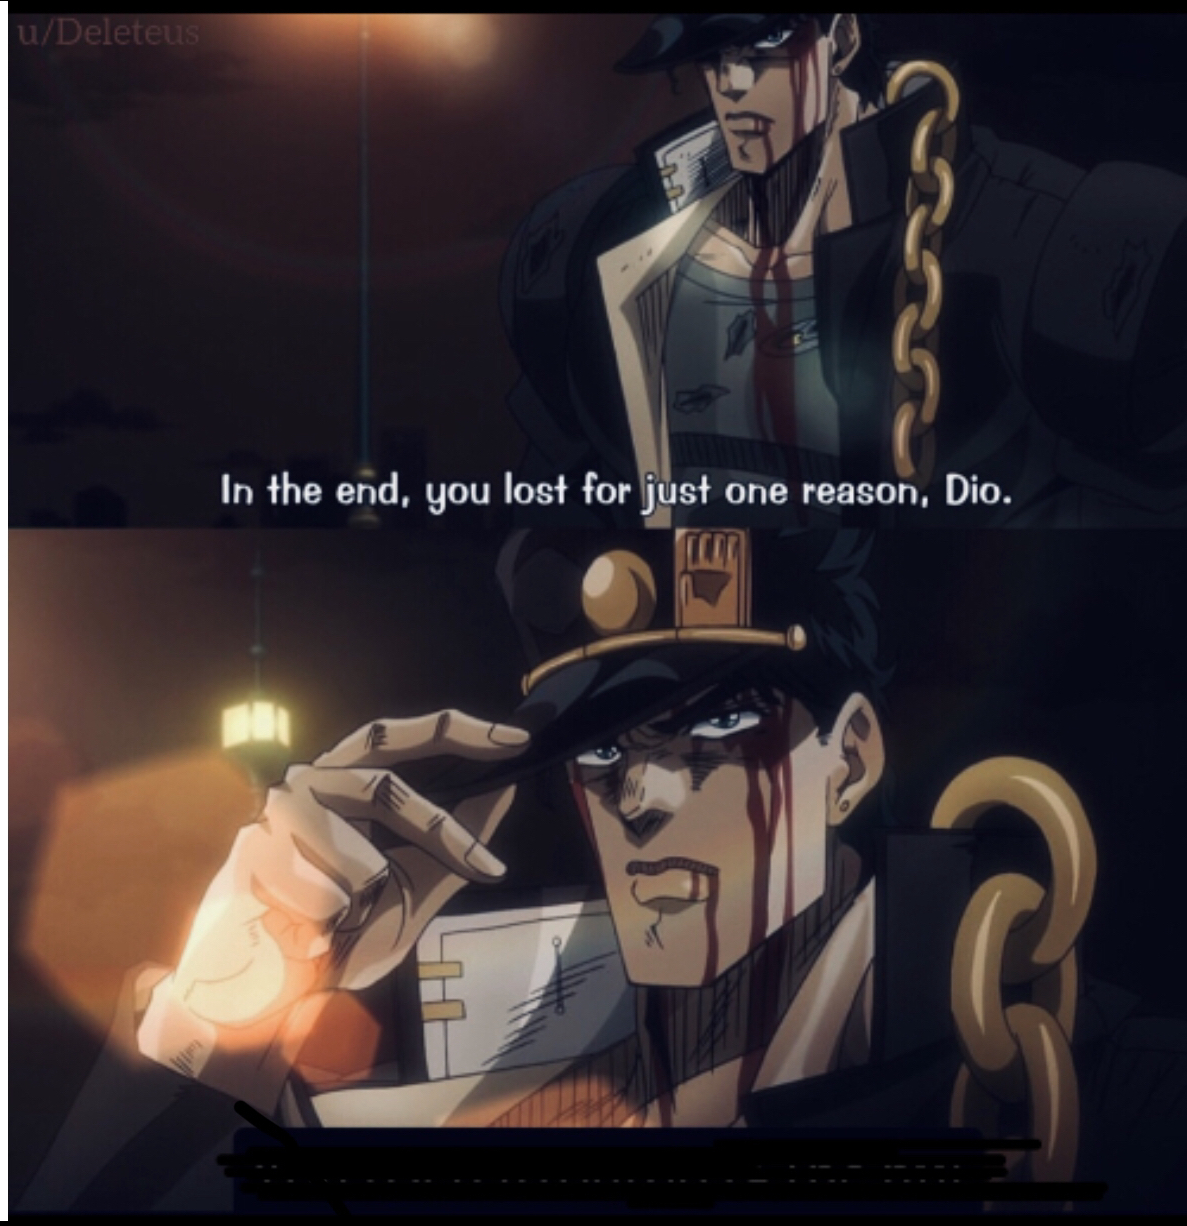 The reason Dio lost Blank Meme Template